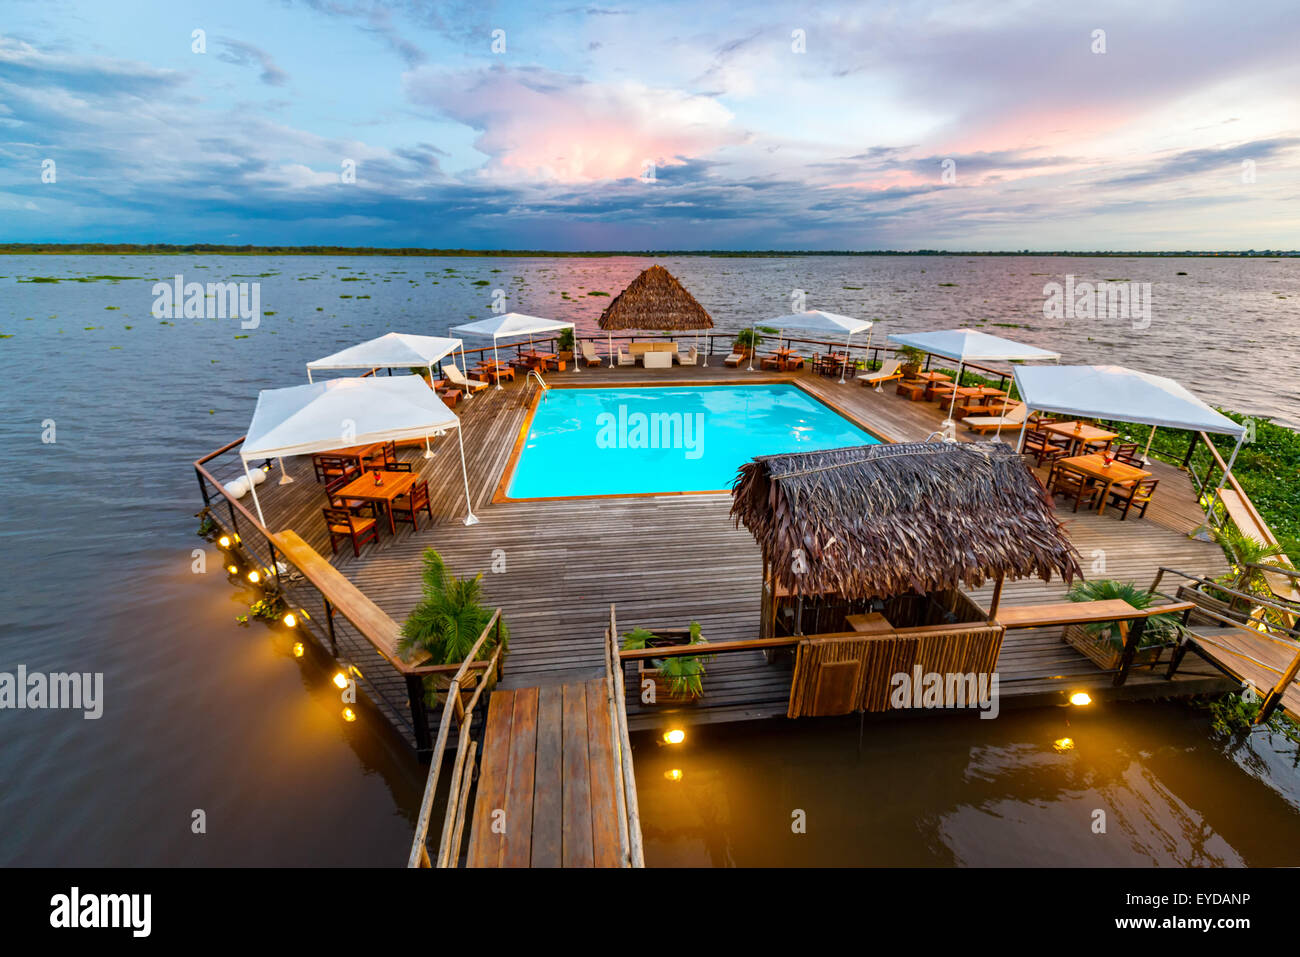 Swimming pool floating in the Amazon River in Iquitos, Peru Stock Photo